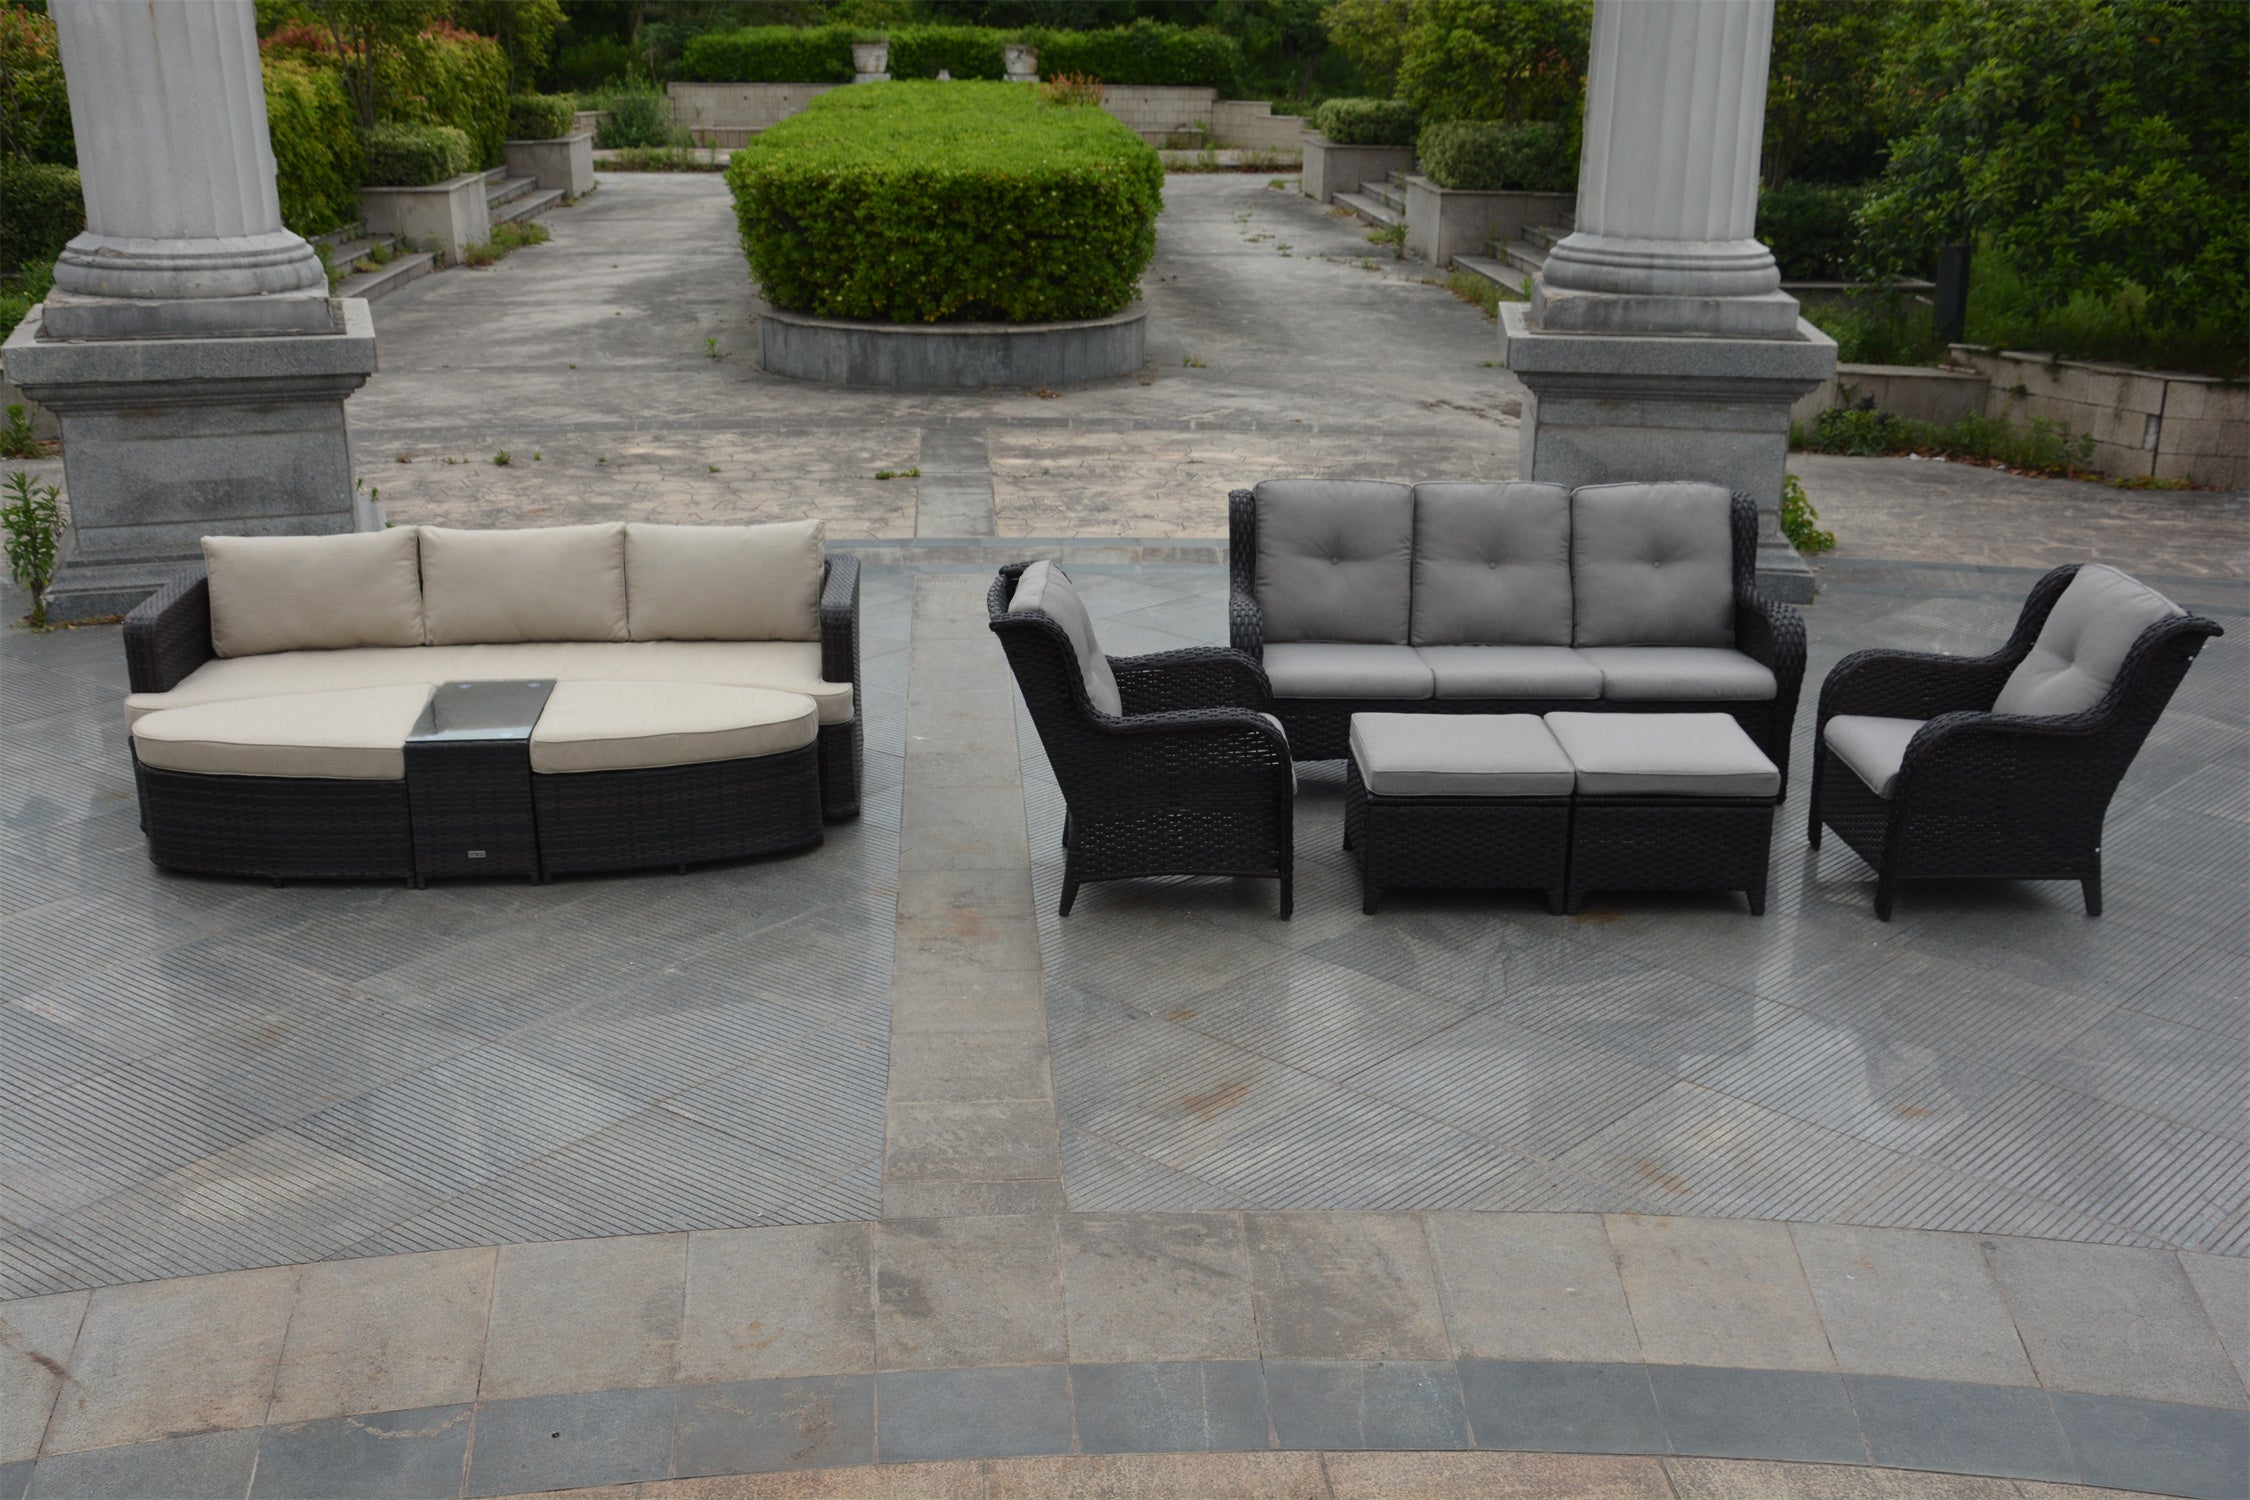 Gray 5-Piece Wicker Patio Conversation Seating Set with Gray Cushions and Cochran 4 Piece Deep Seating Group Daybed with Cushions